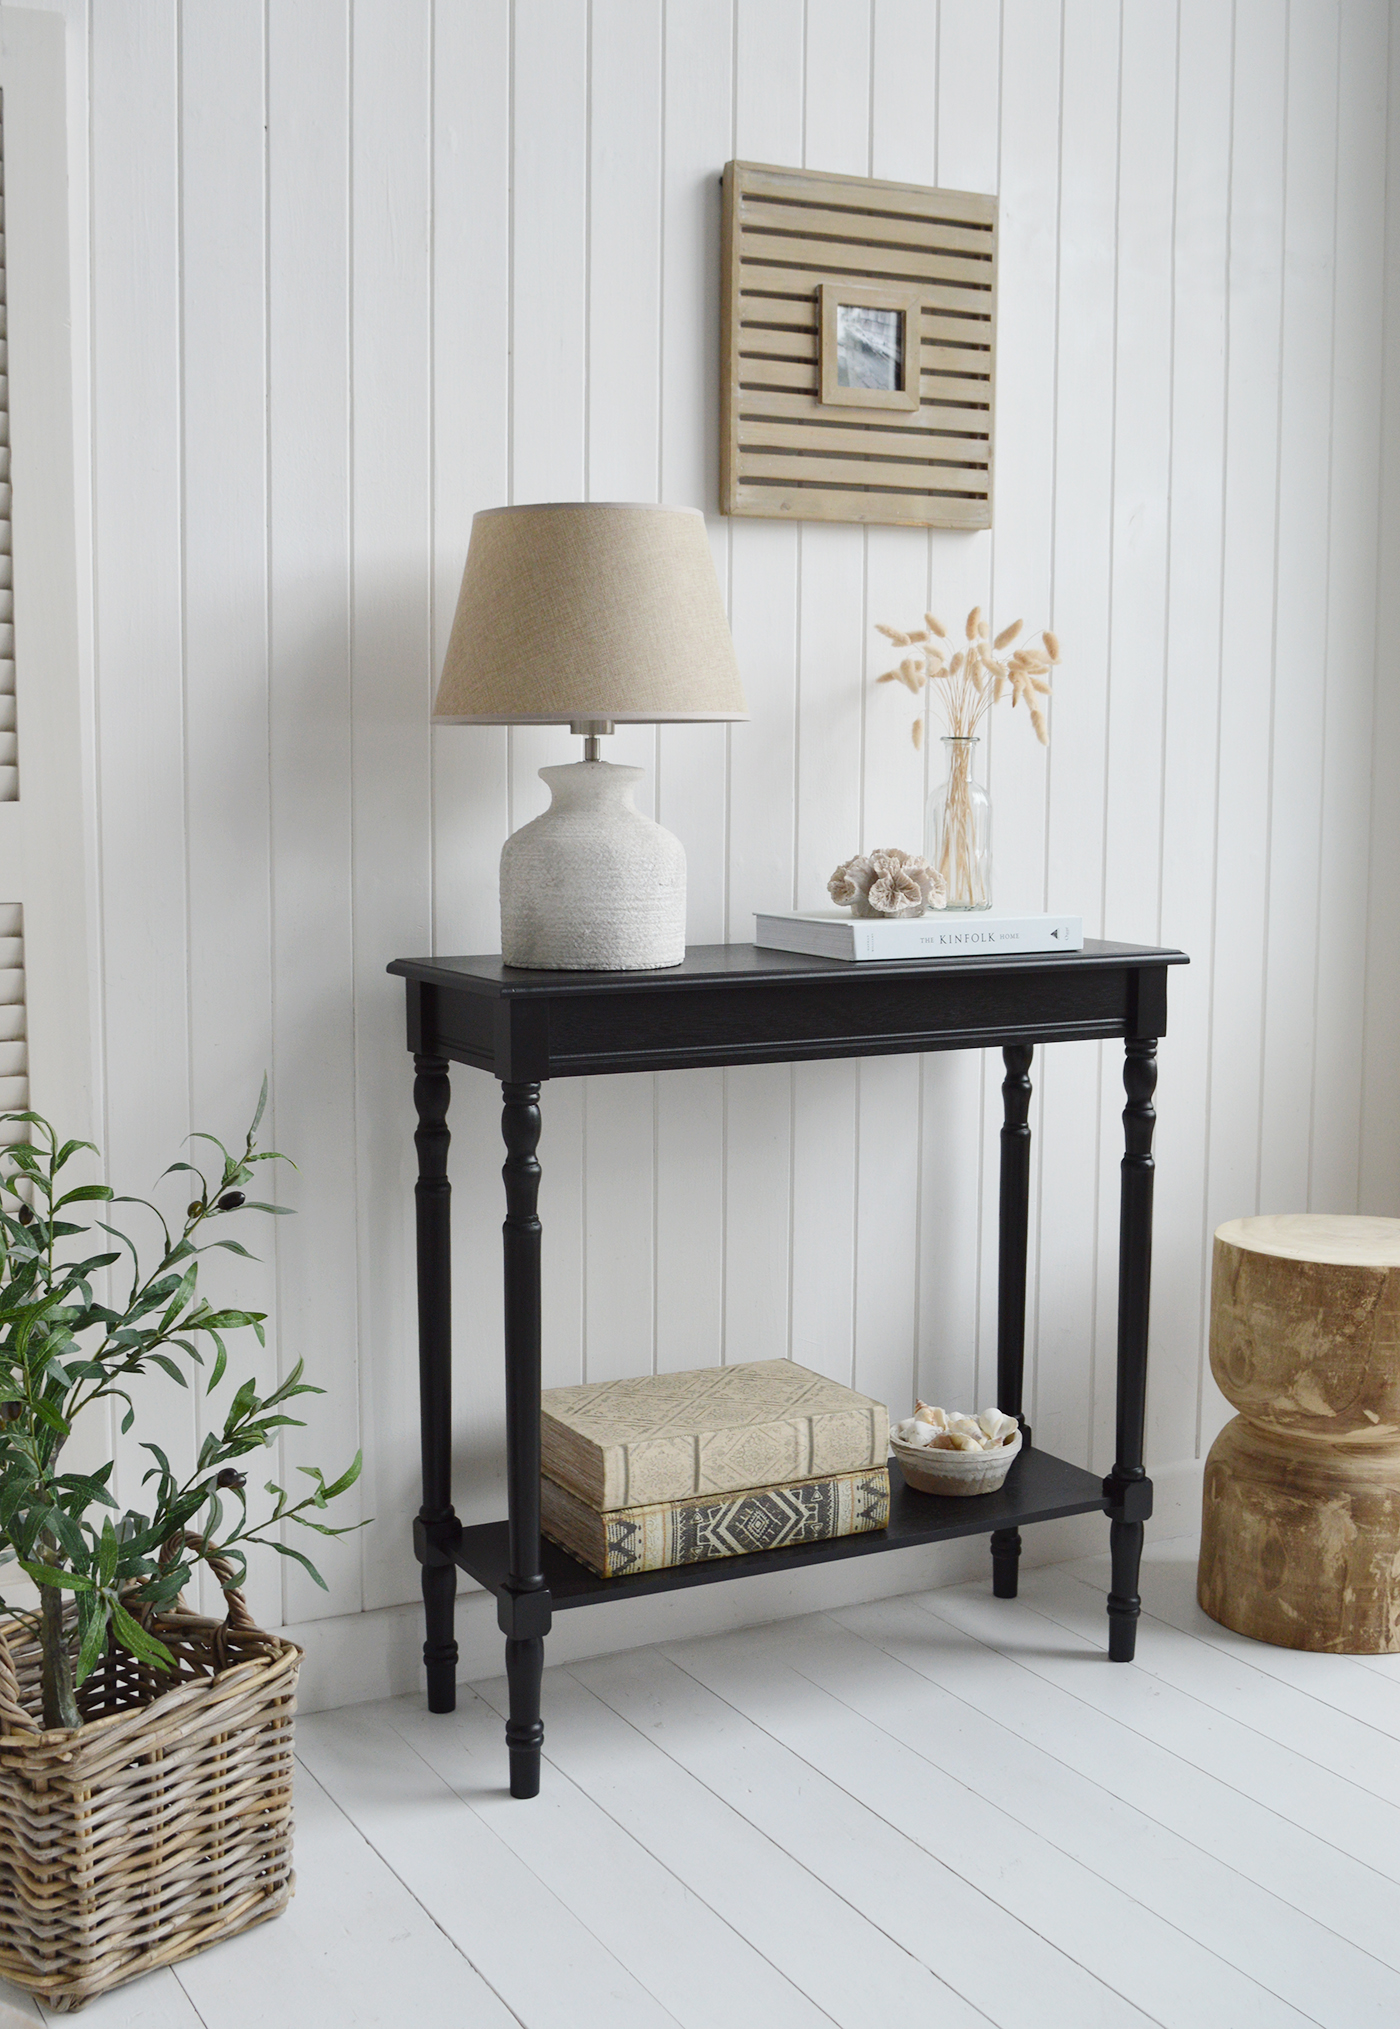 Ashby black furniture. A black console table with a shelf. A small Console Table for Coastal, Beach House Modern Farmhouse and Country Homes and Interiors, perfect for hallways, living rooms and bedroom furniture